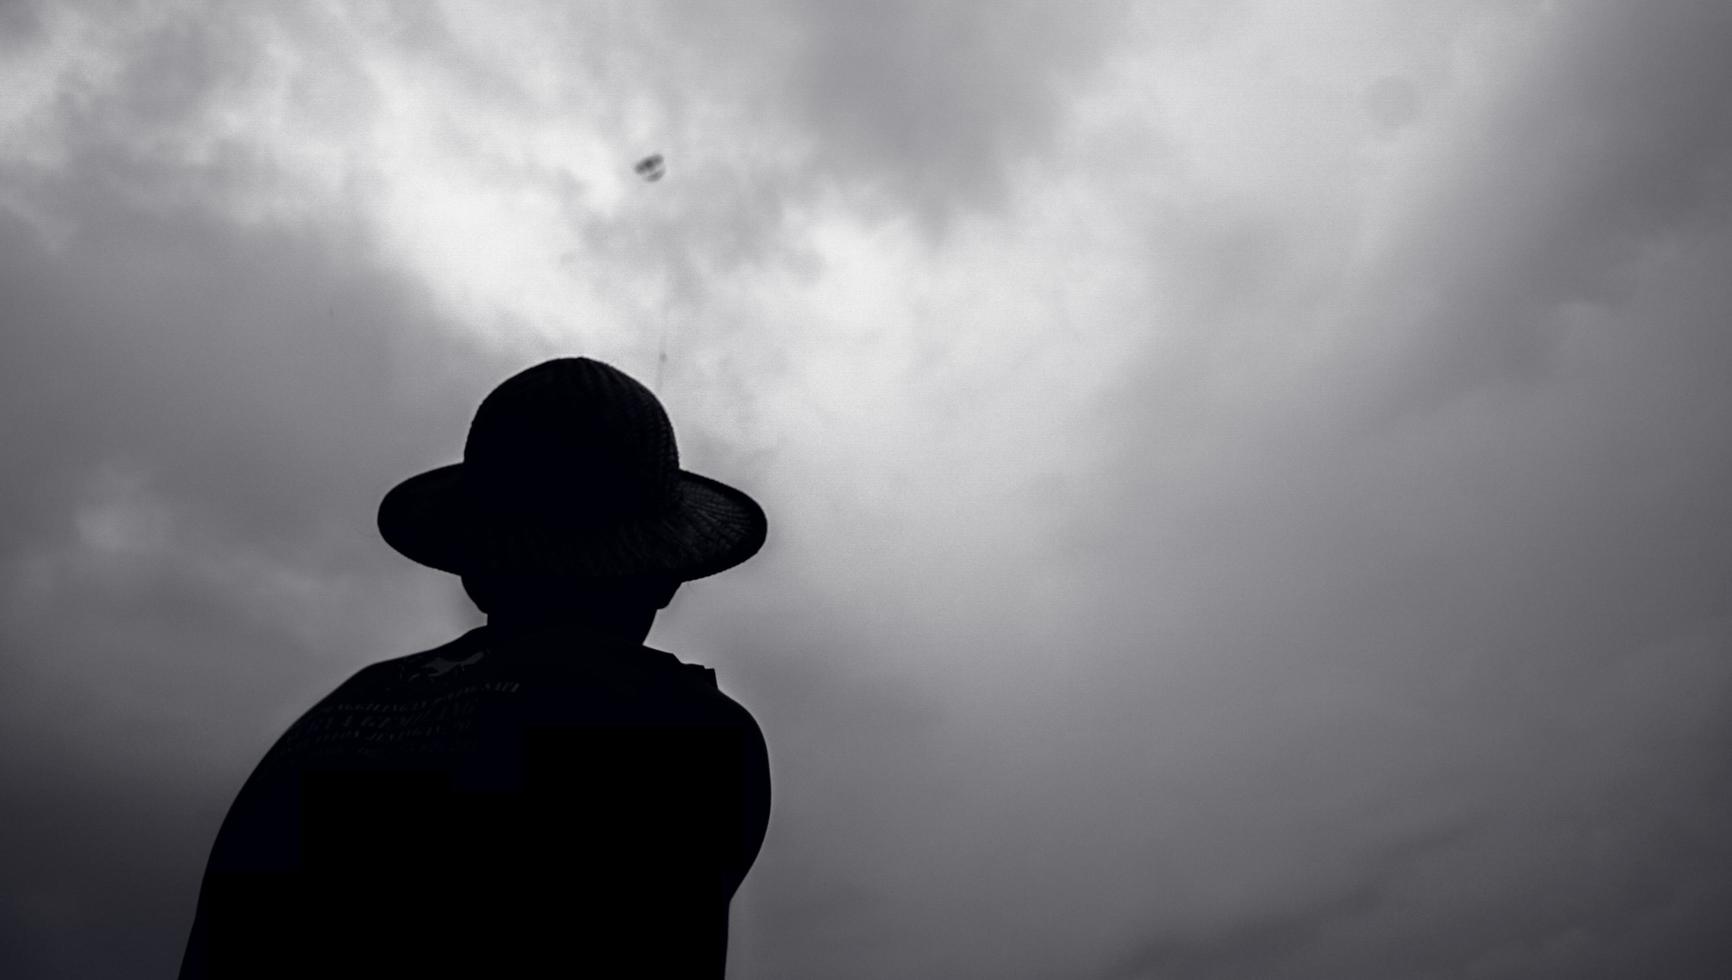 Ponorogo, Indonesia 2021 - Silhouette of a man with traditional kite photo